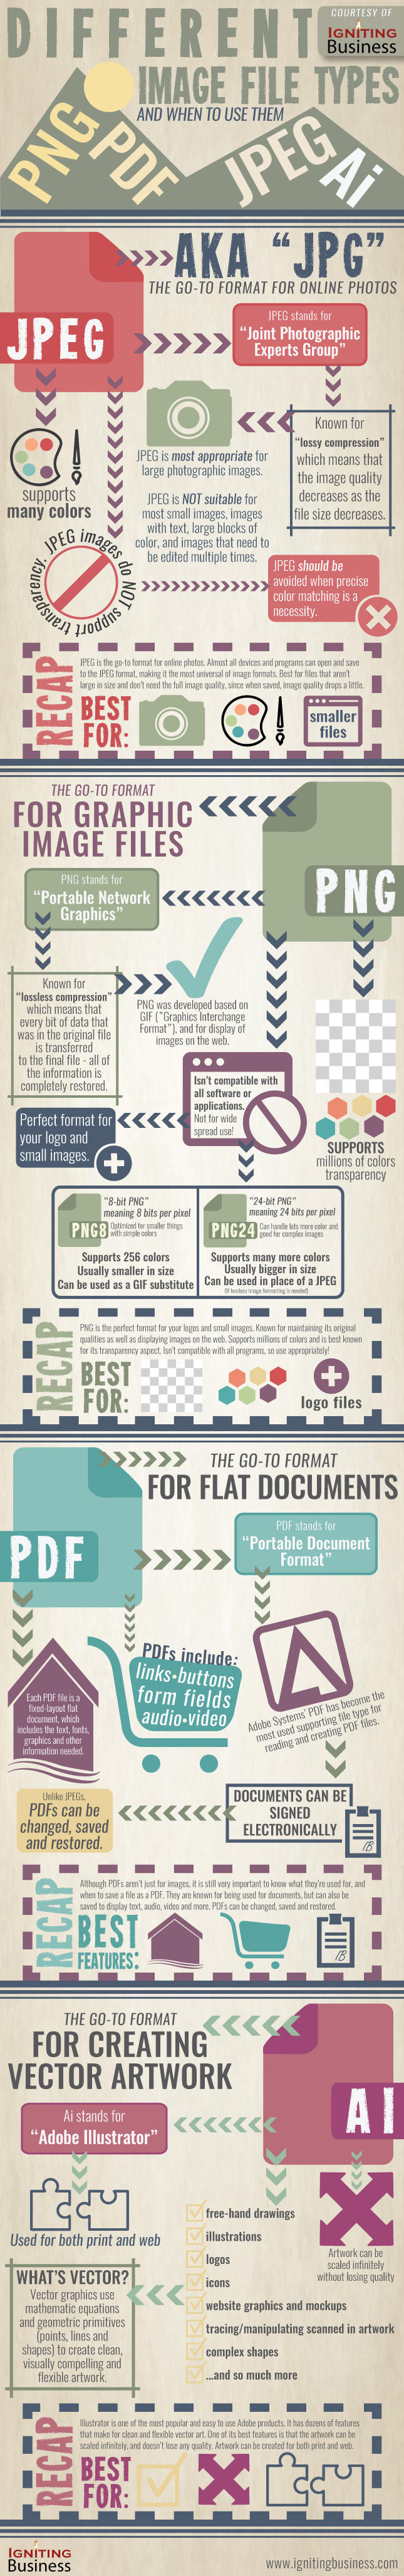 Image File Types Infographic